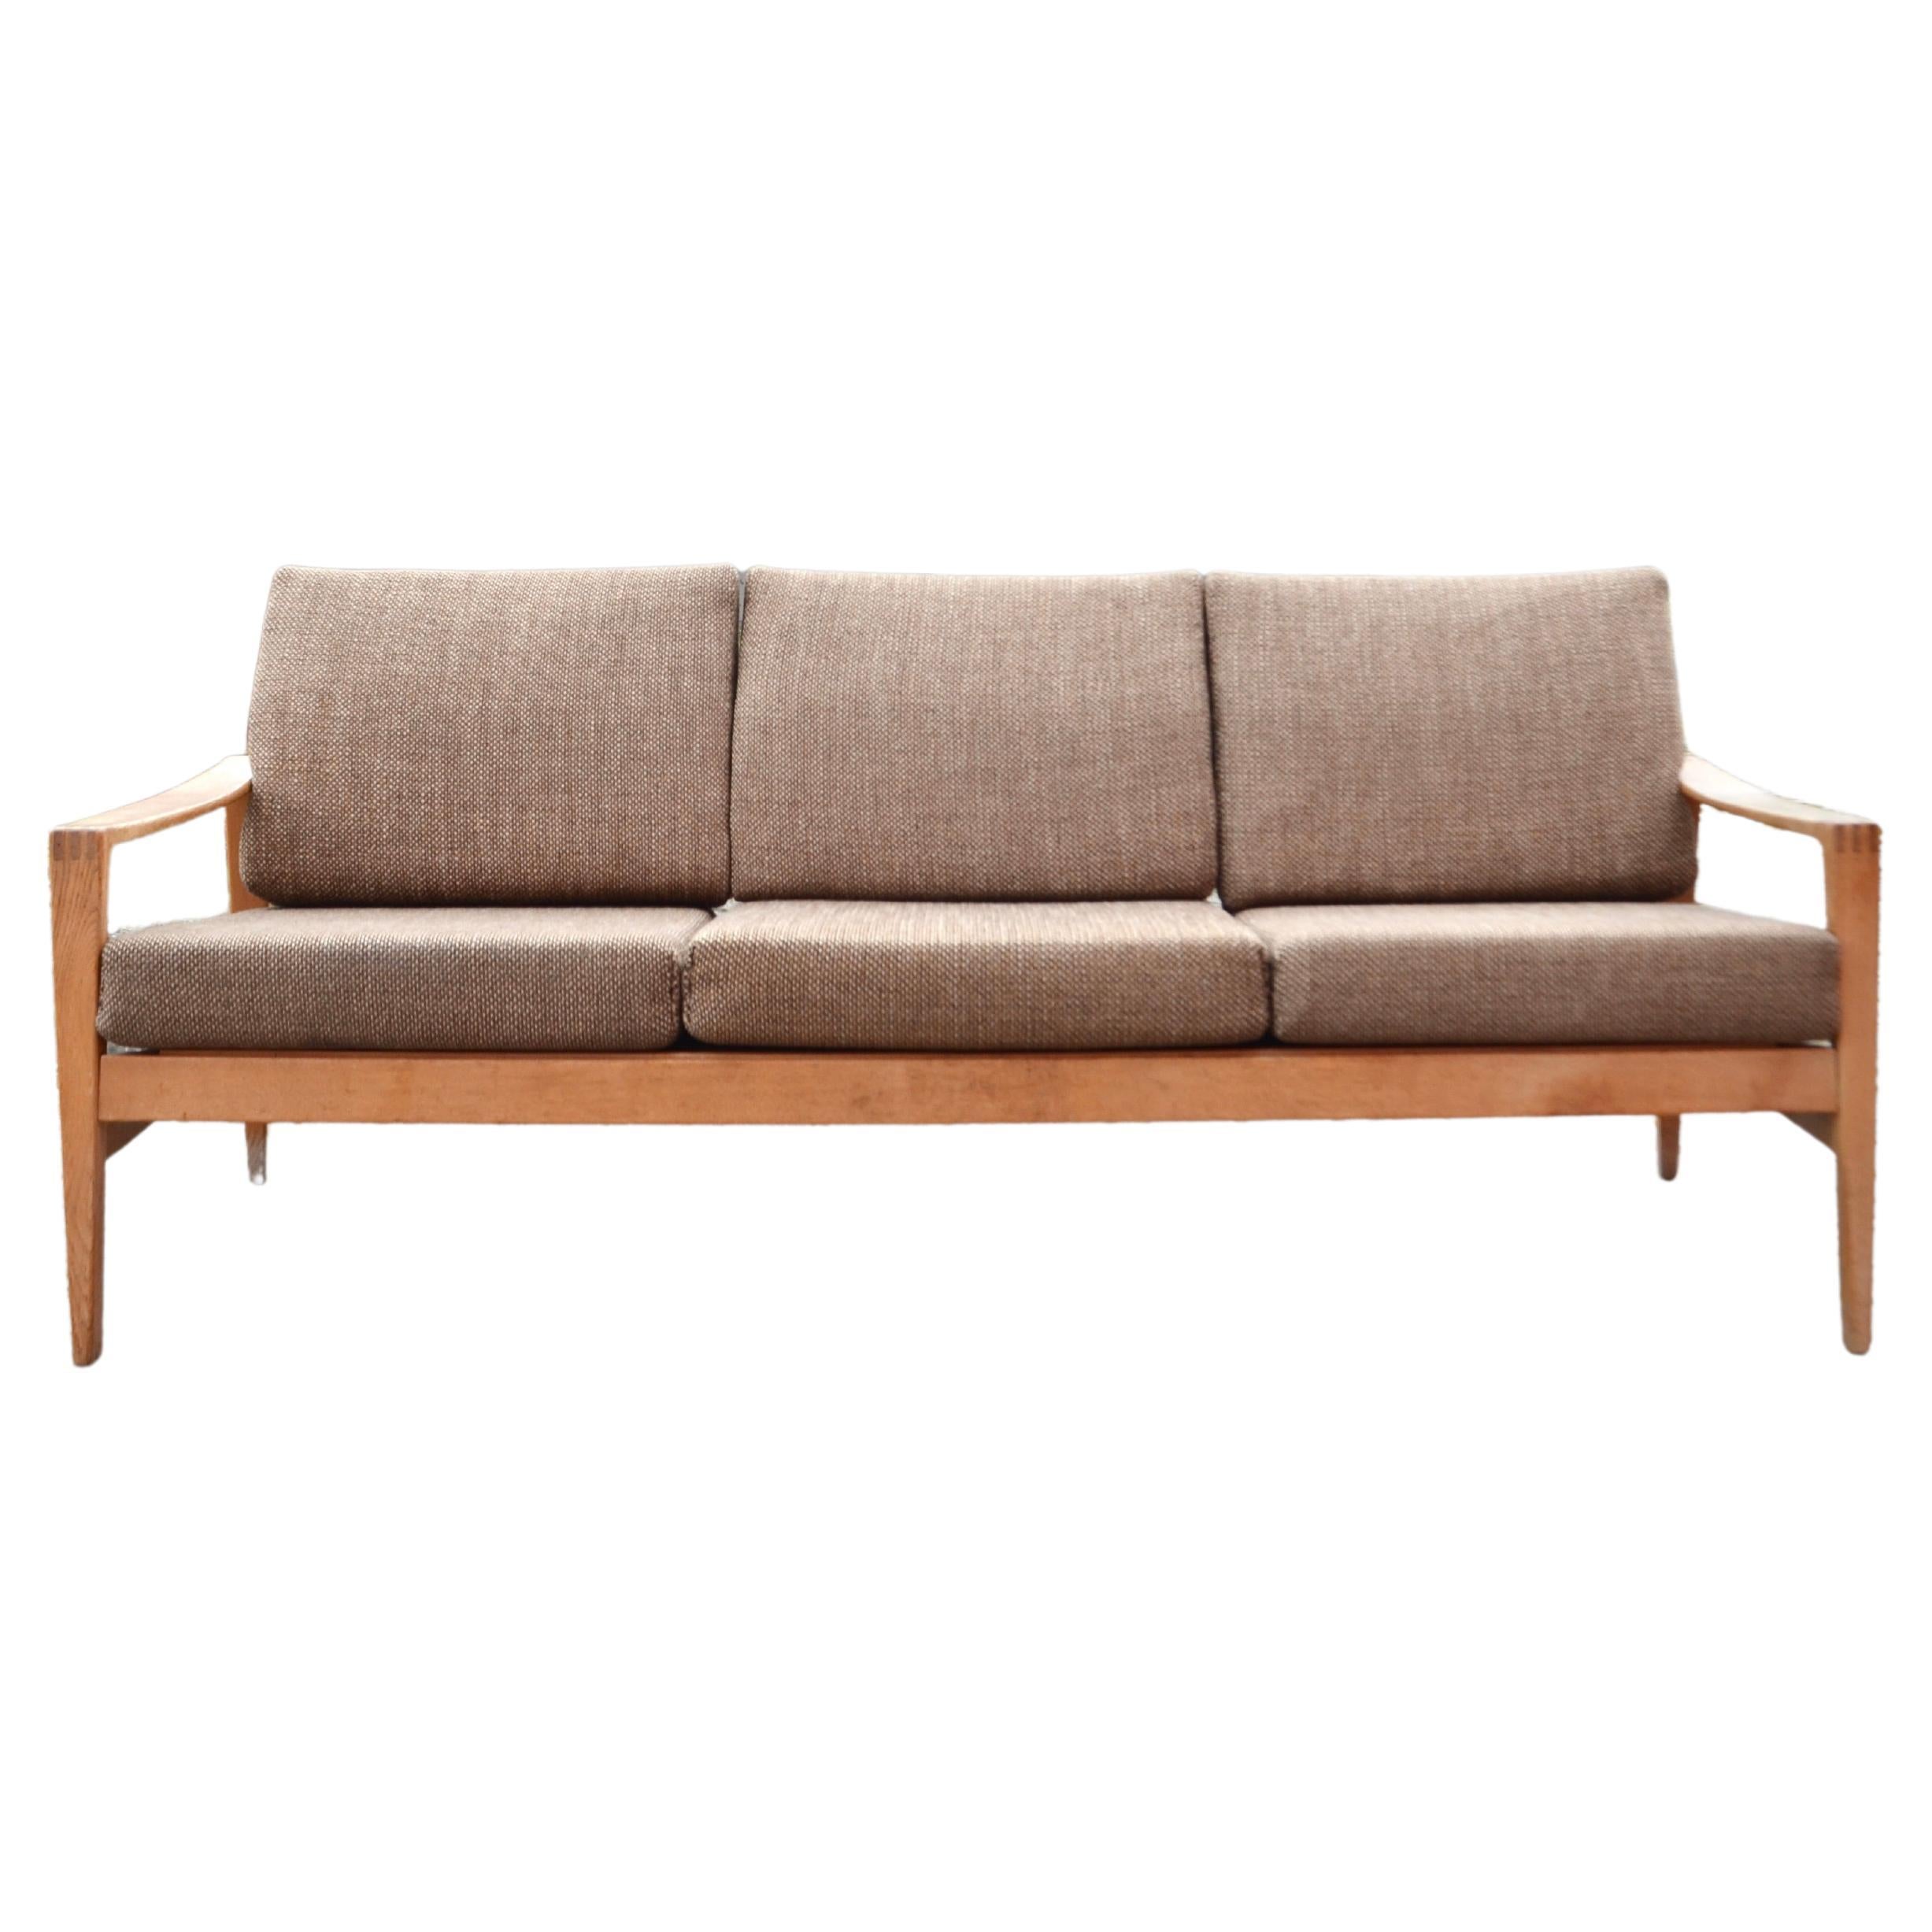 Rare Sofa designed by Hartmut Lohmeyer for Wilkhahn.
Minimalistic design.
Oak wood and brown wool.
Beautiful Patina on the wood.
A very comfortable seating comfort.
    